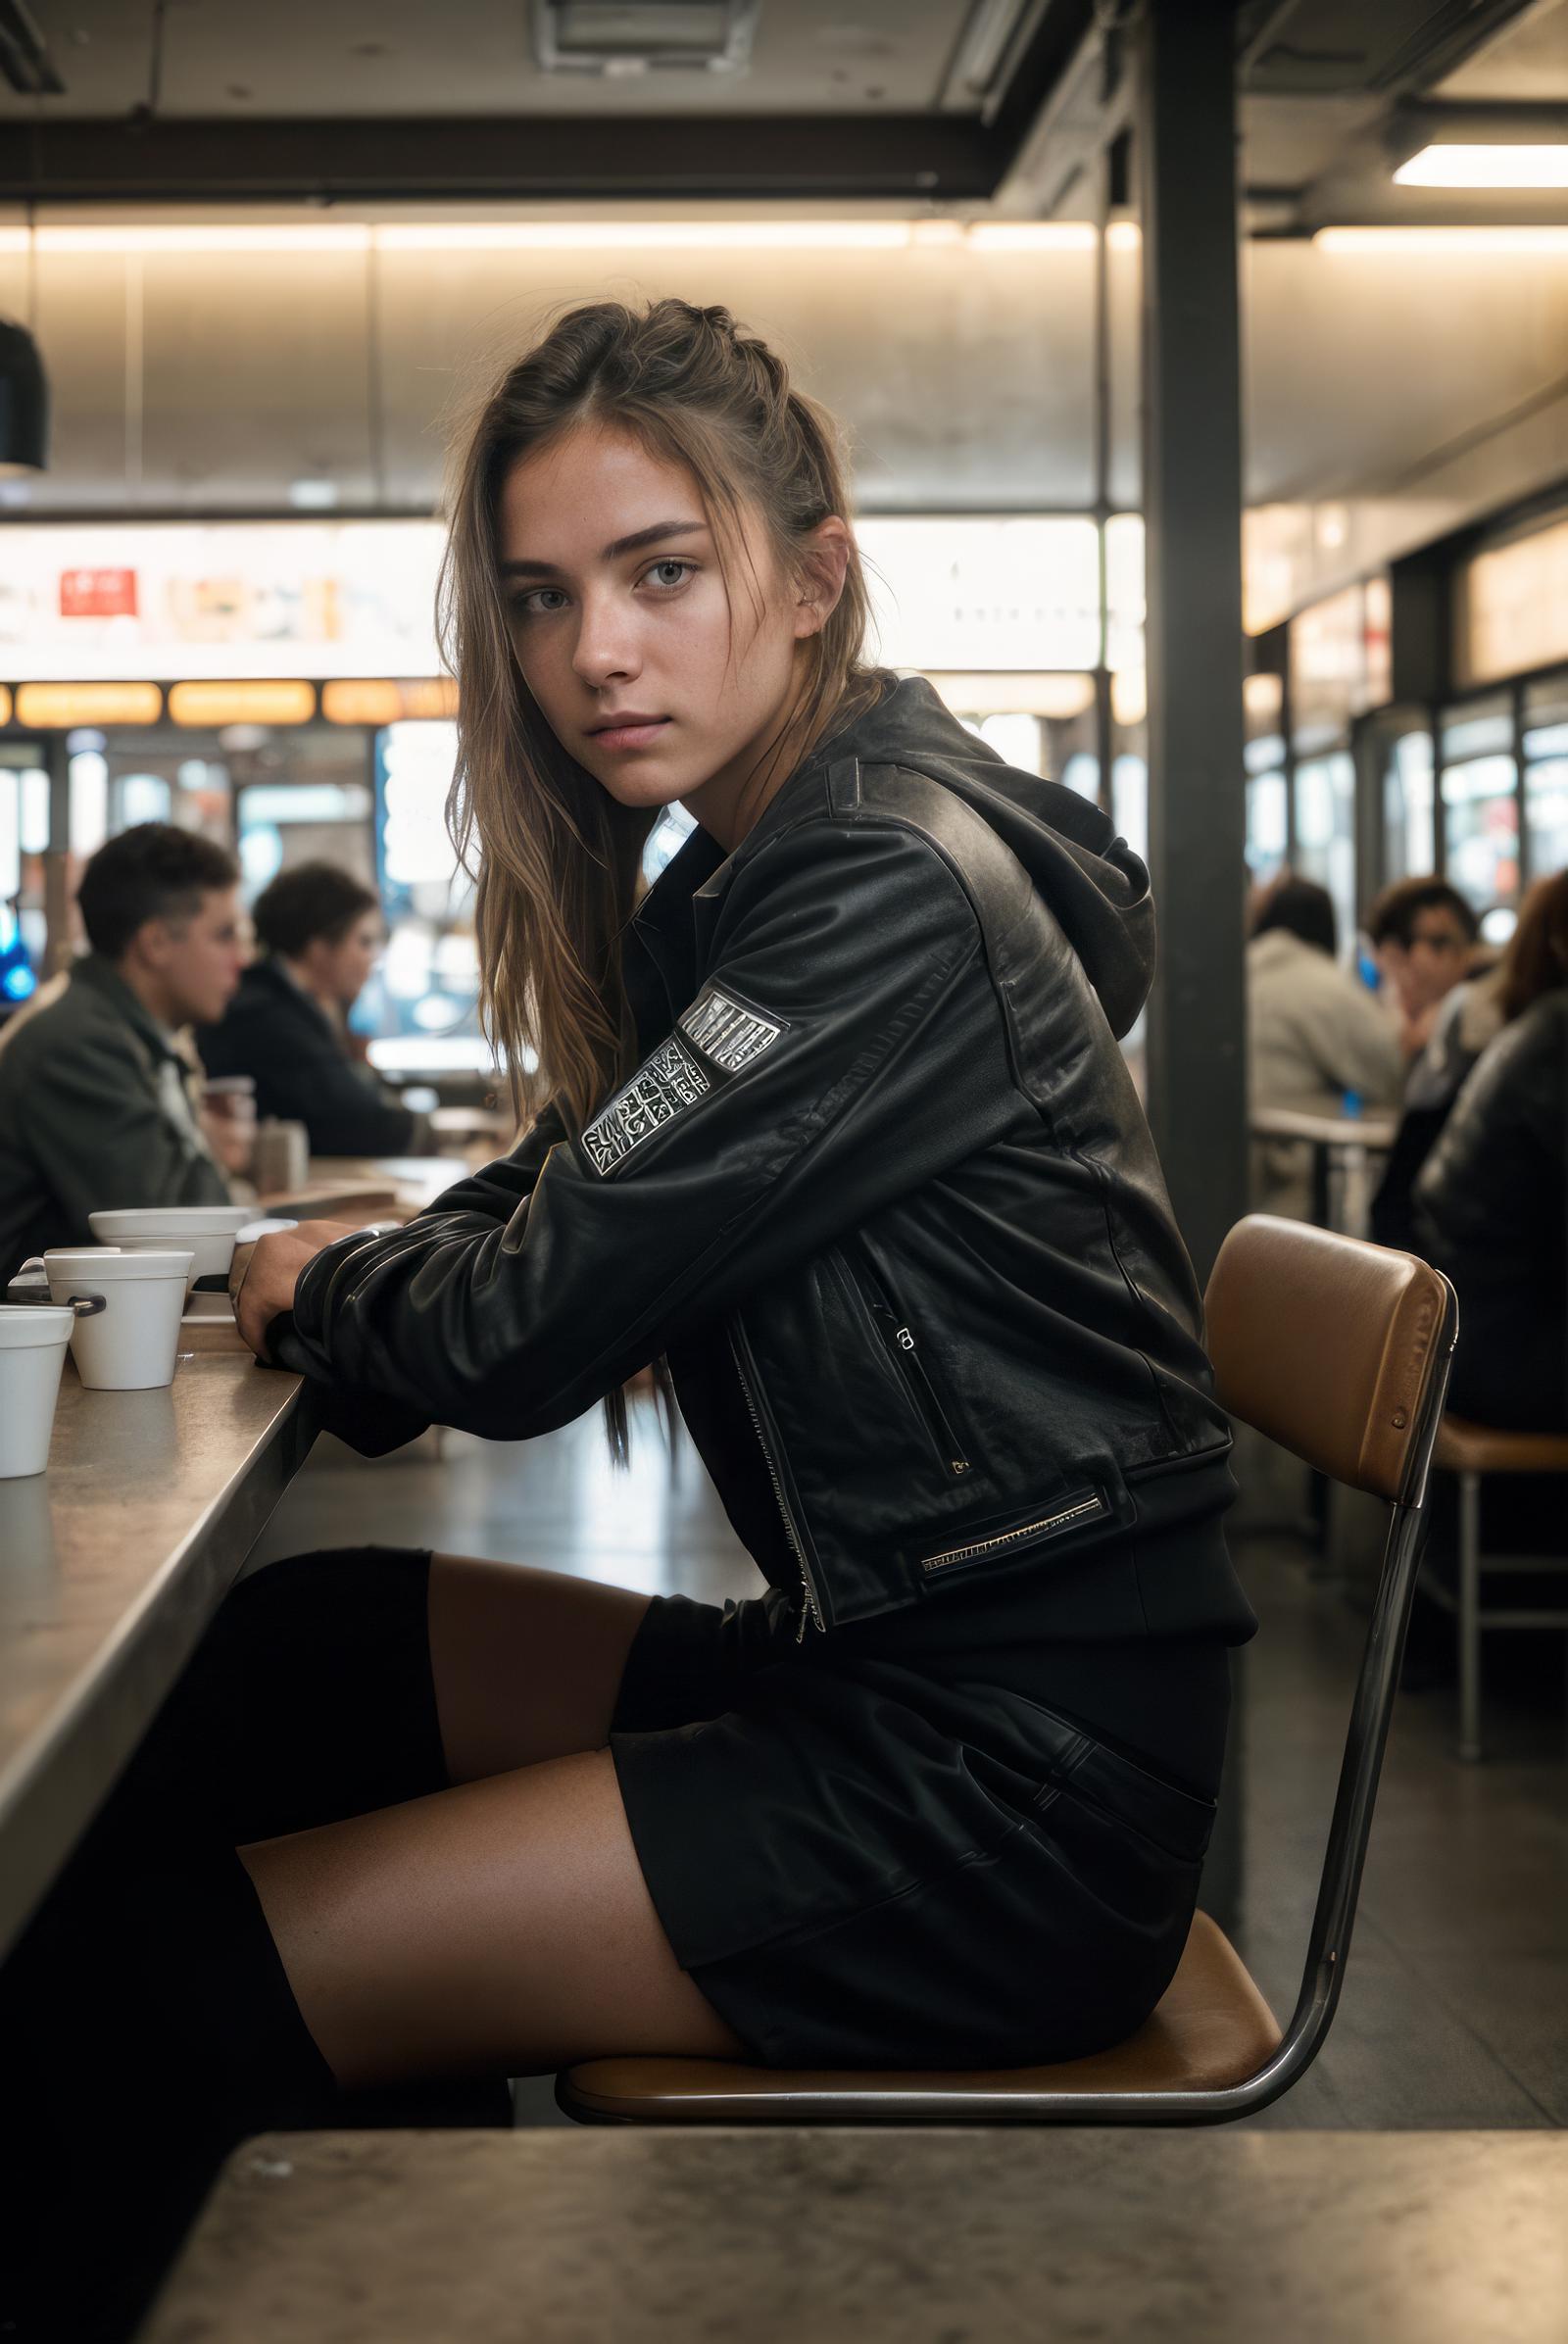 A young woman sitting in a booth at a restaurant wearing a black leather jacket.